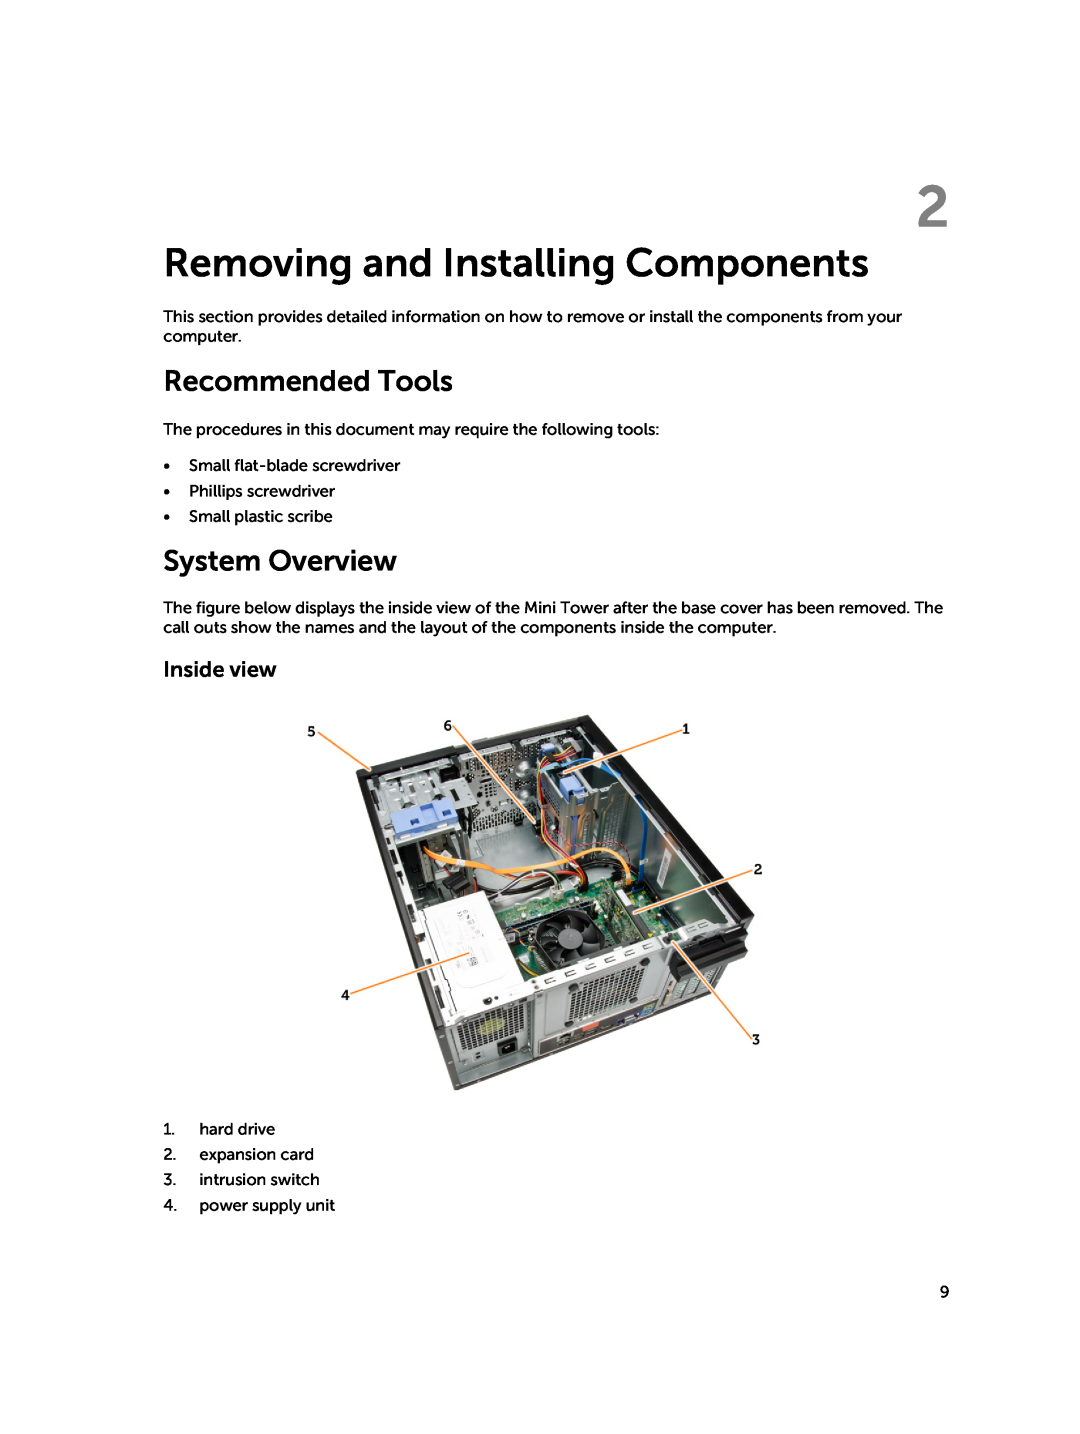 Dell D15M owner manual Removing and Installing Components, Recommended Tools, System Overview, Inside view 